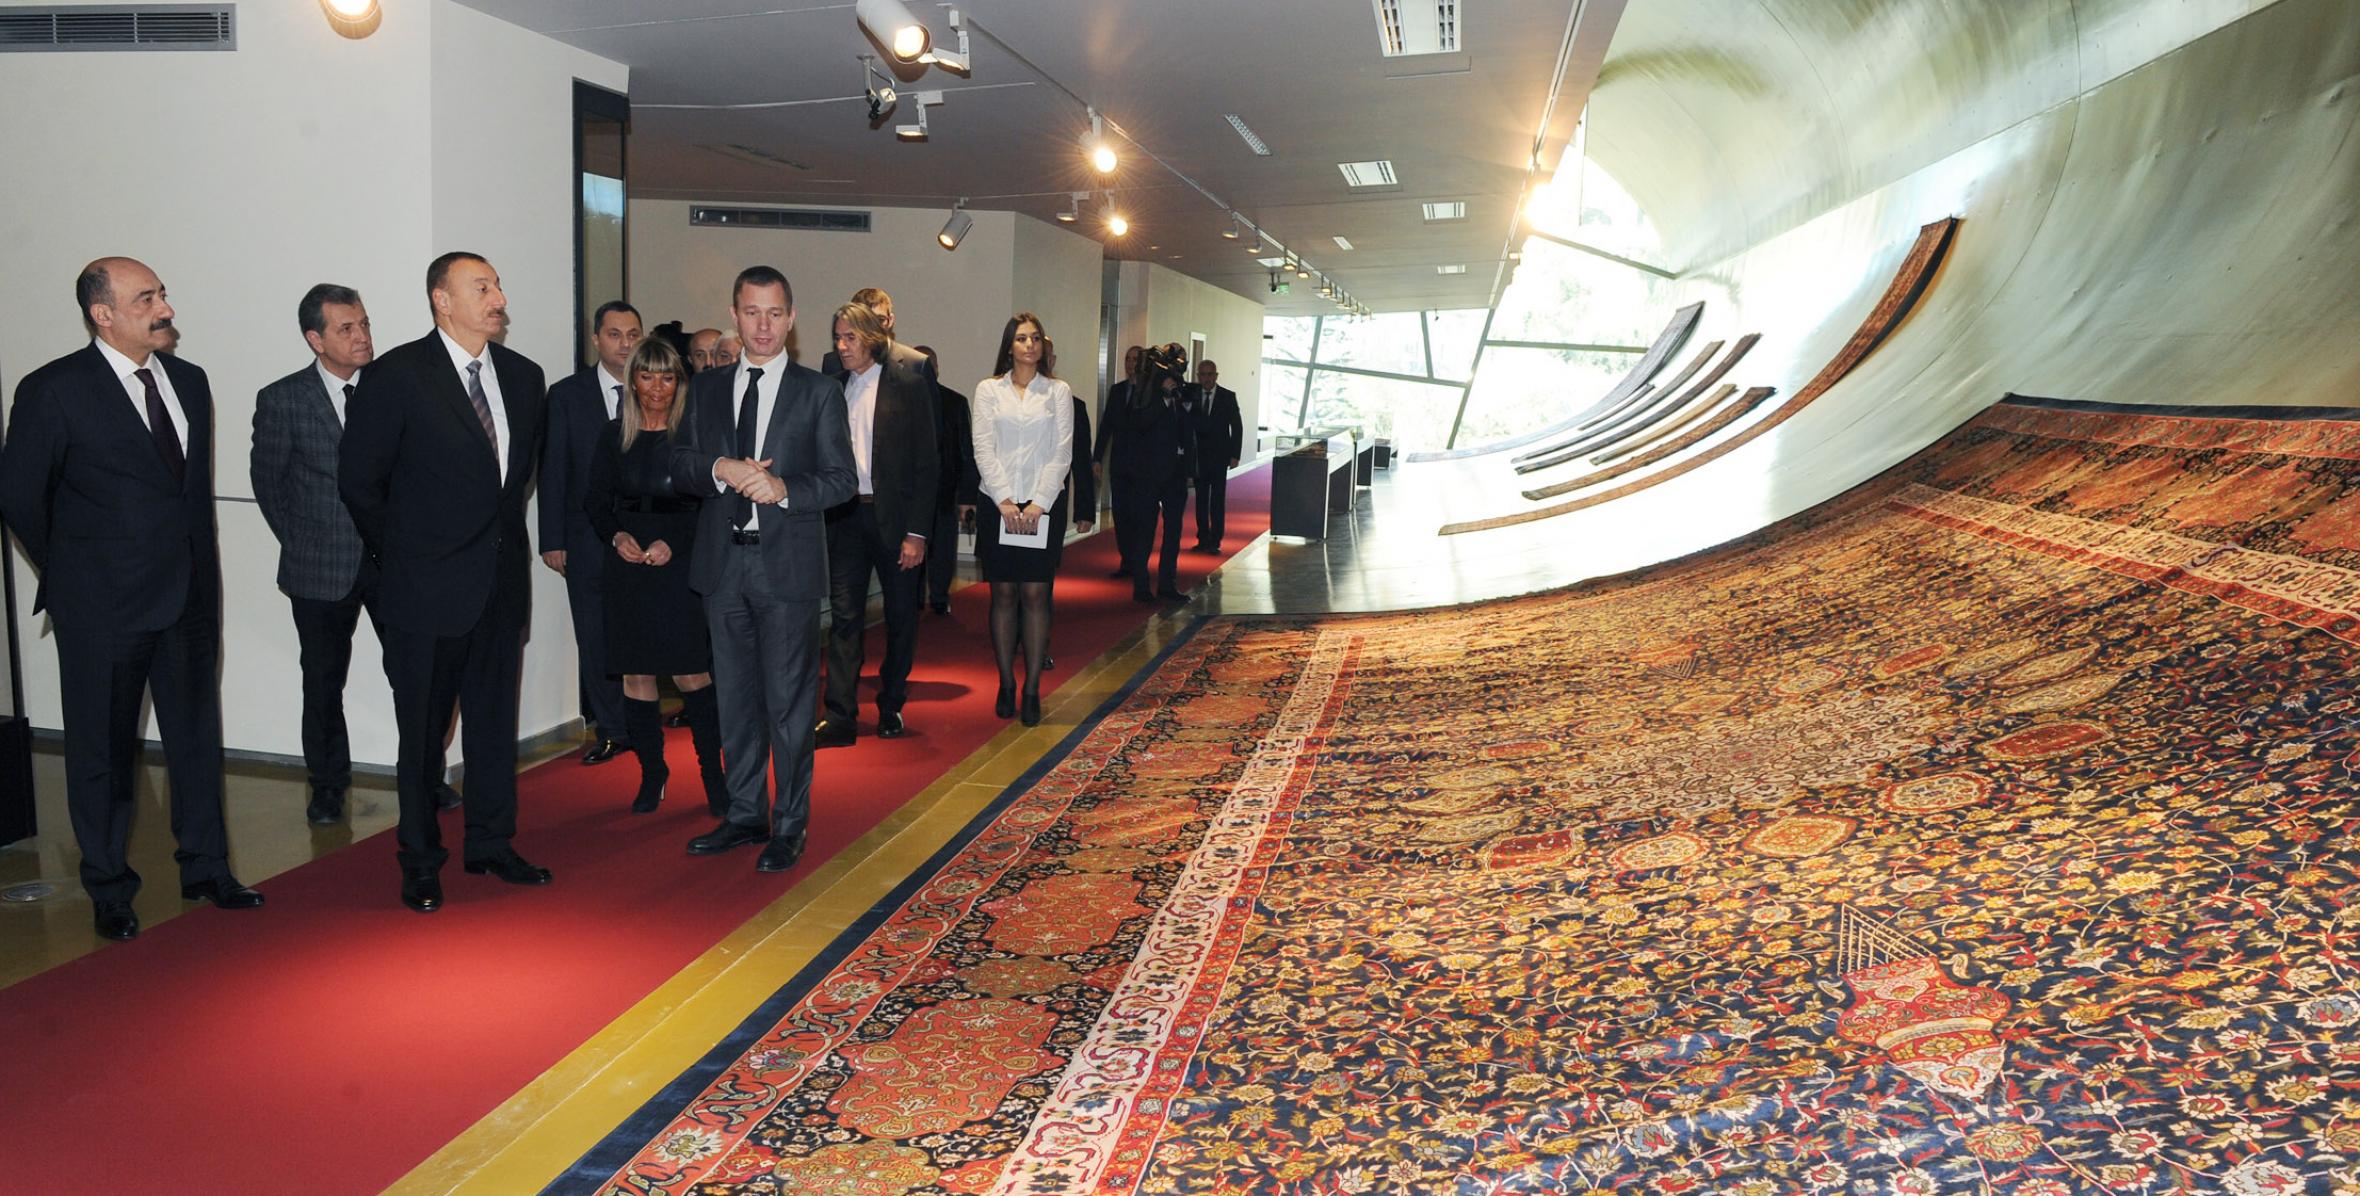 Ilham Aliyev has familiarized himself with the design of exhibitions in the new building of the Carpet Museum